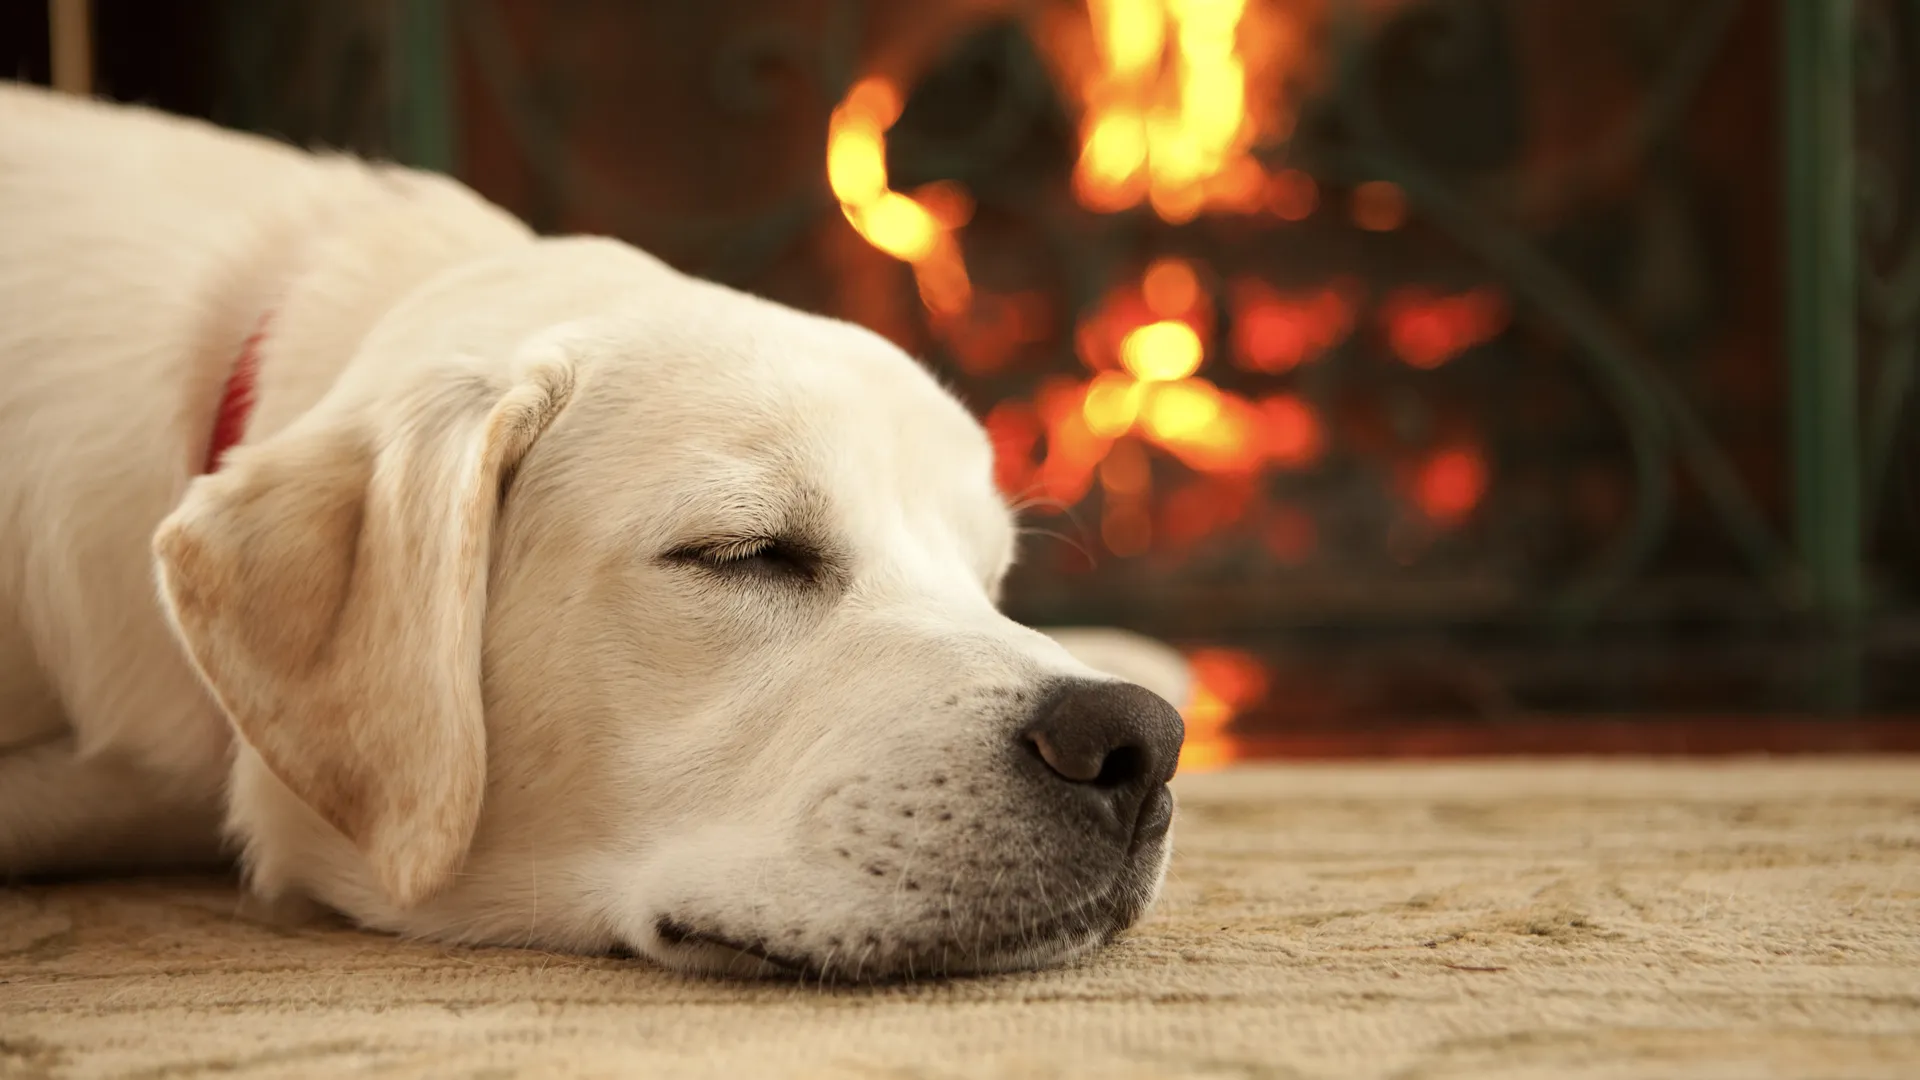 A dog rests by the fireplace